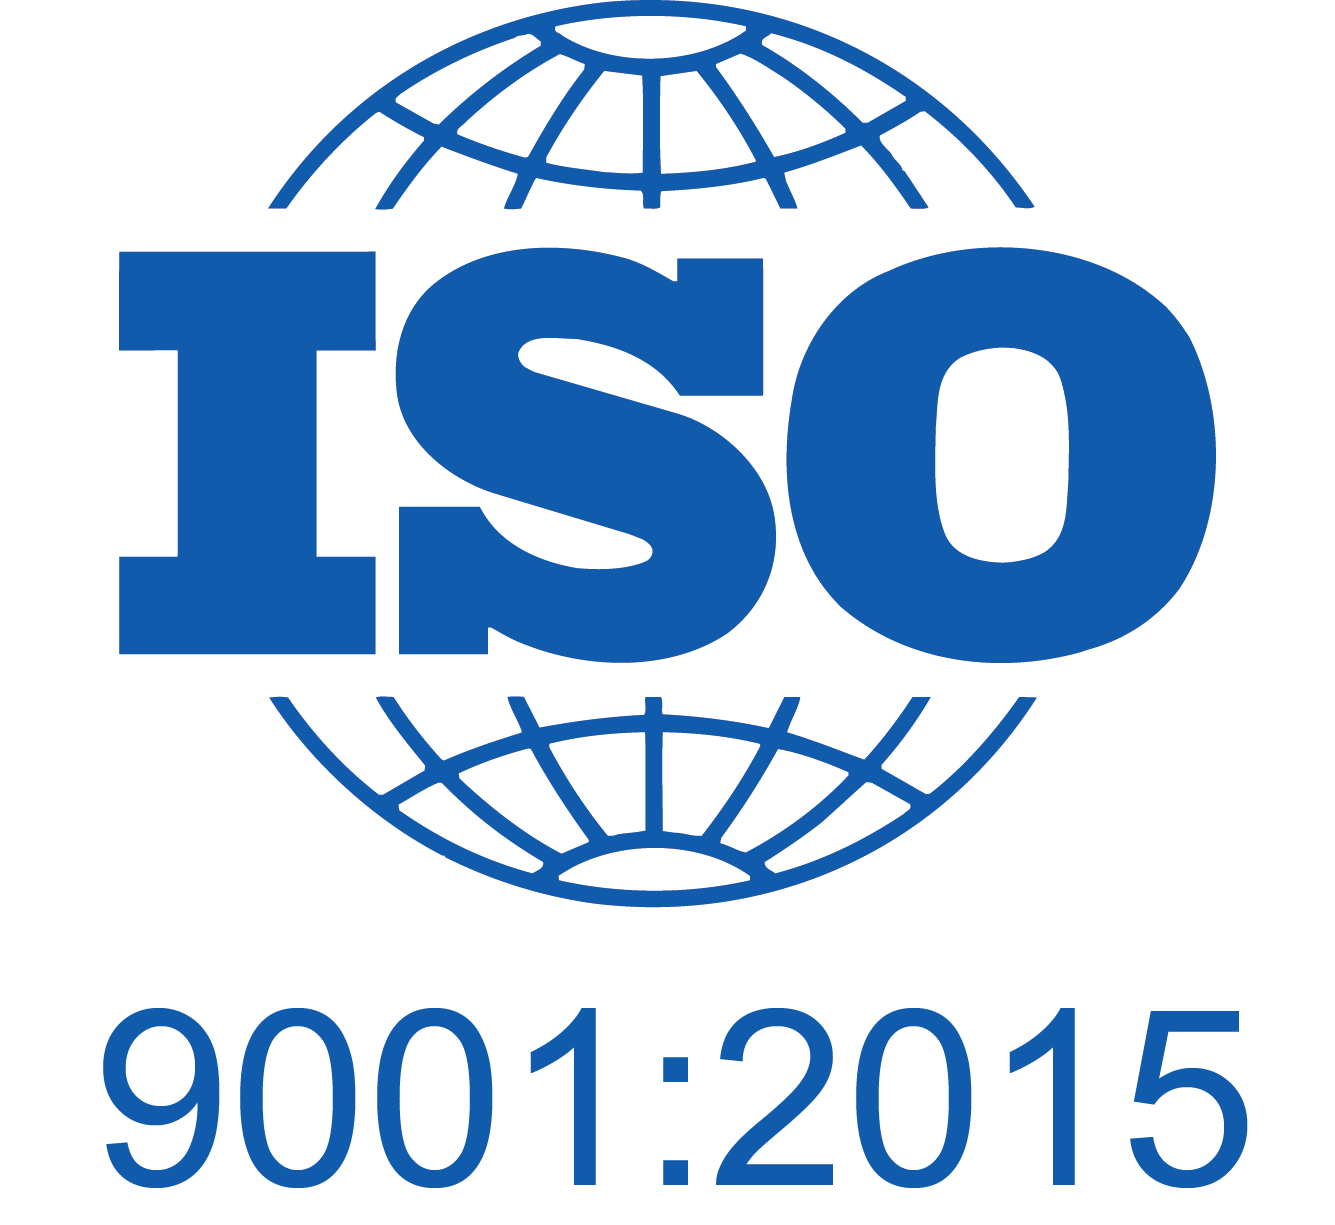 ISO 9001:2015 And 27001:2013 Certifications